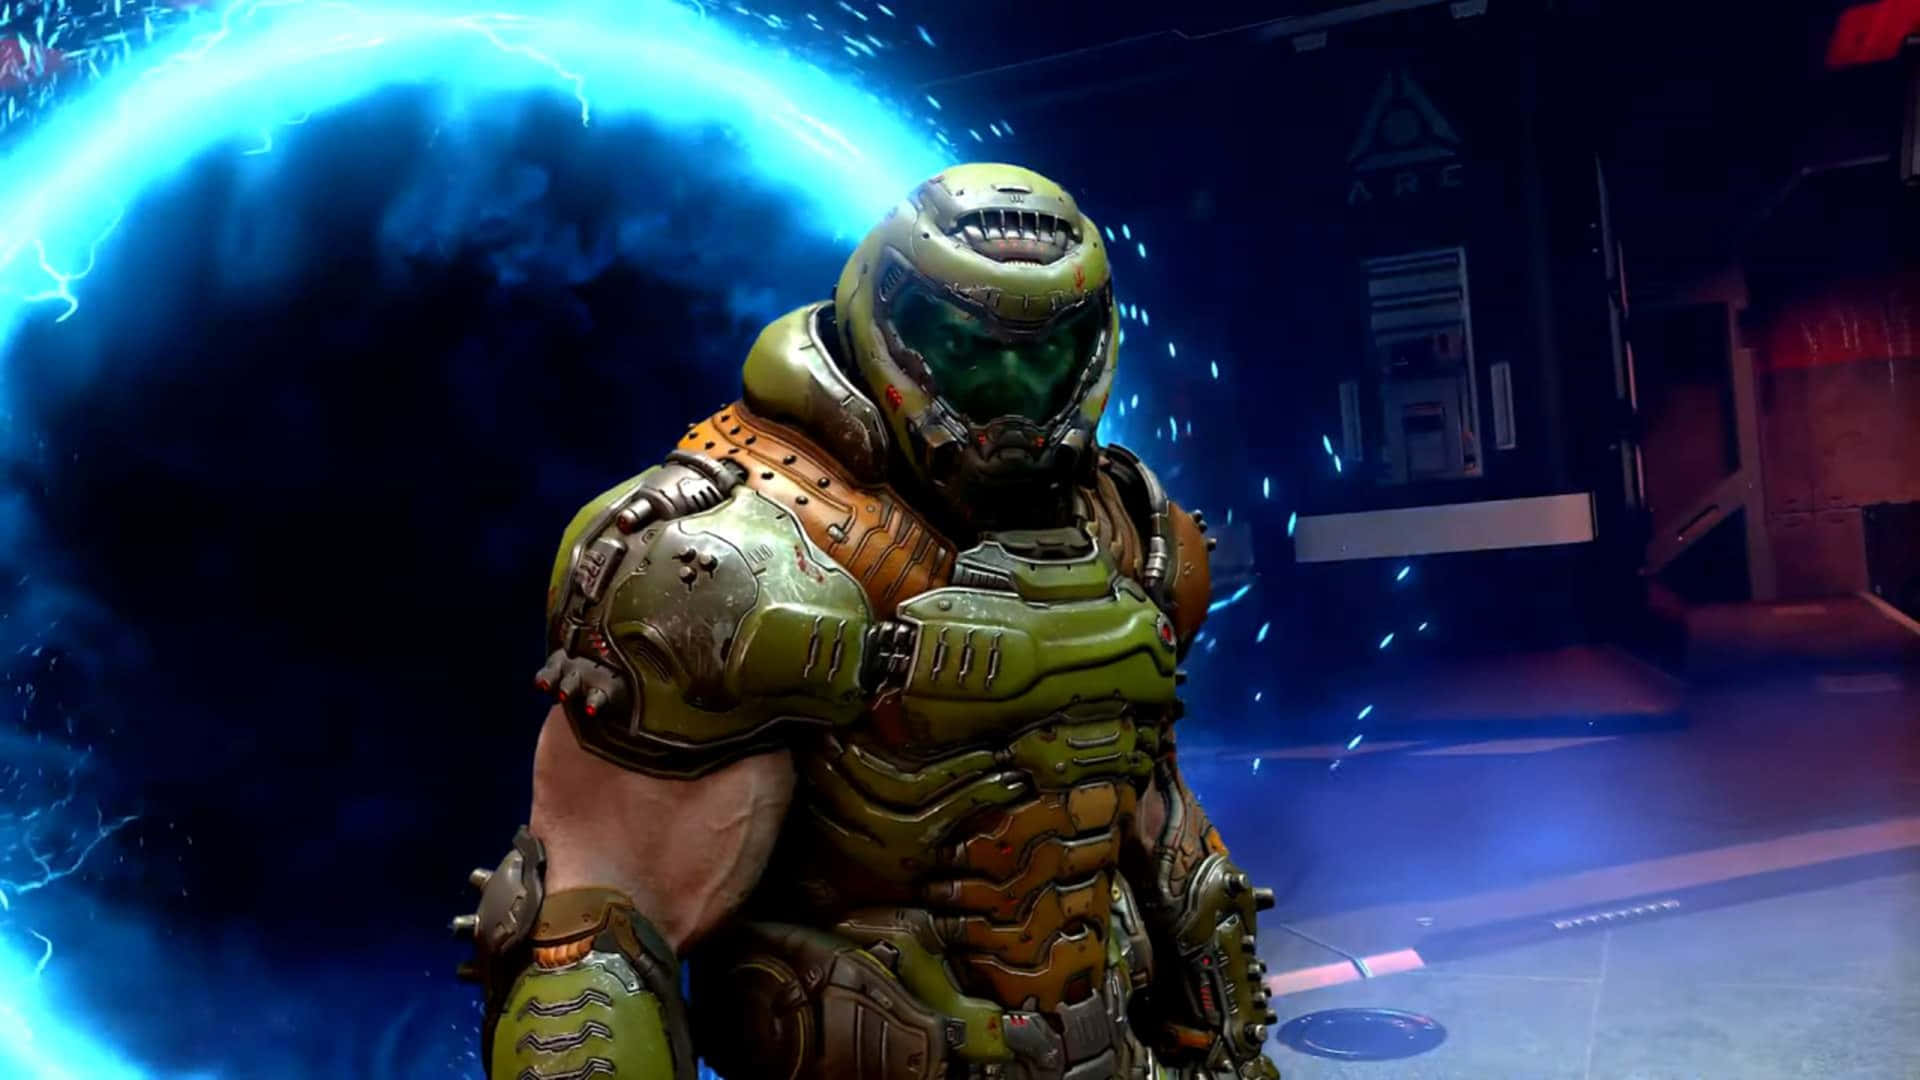 Doom - A Character In A Green Suit Standing In Front Of A Blue Light